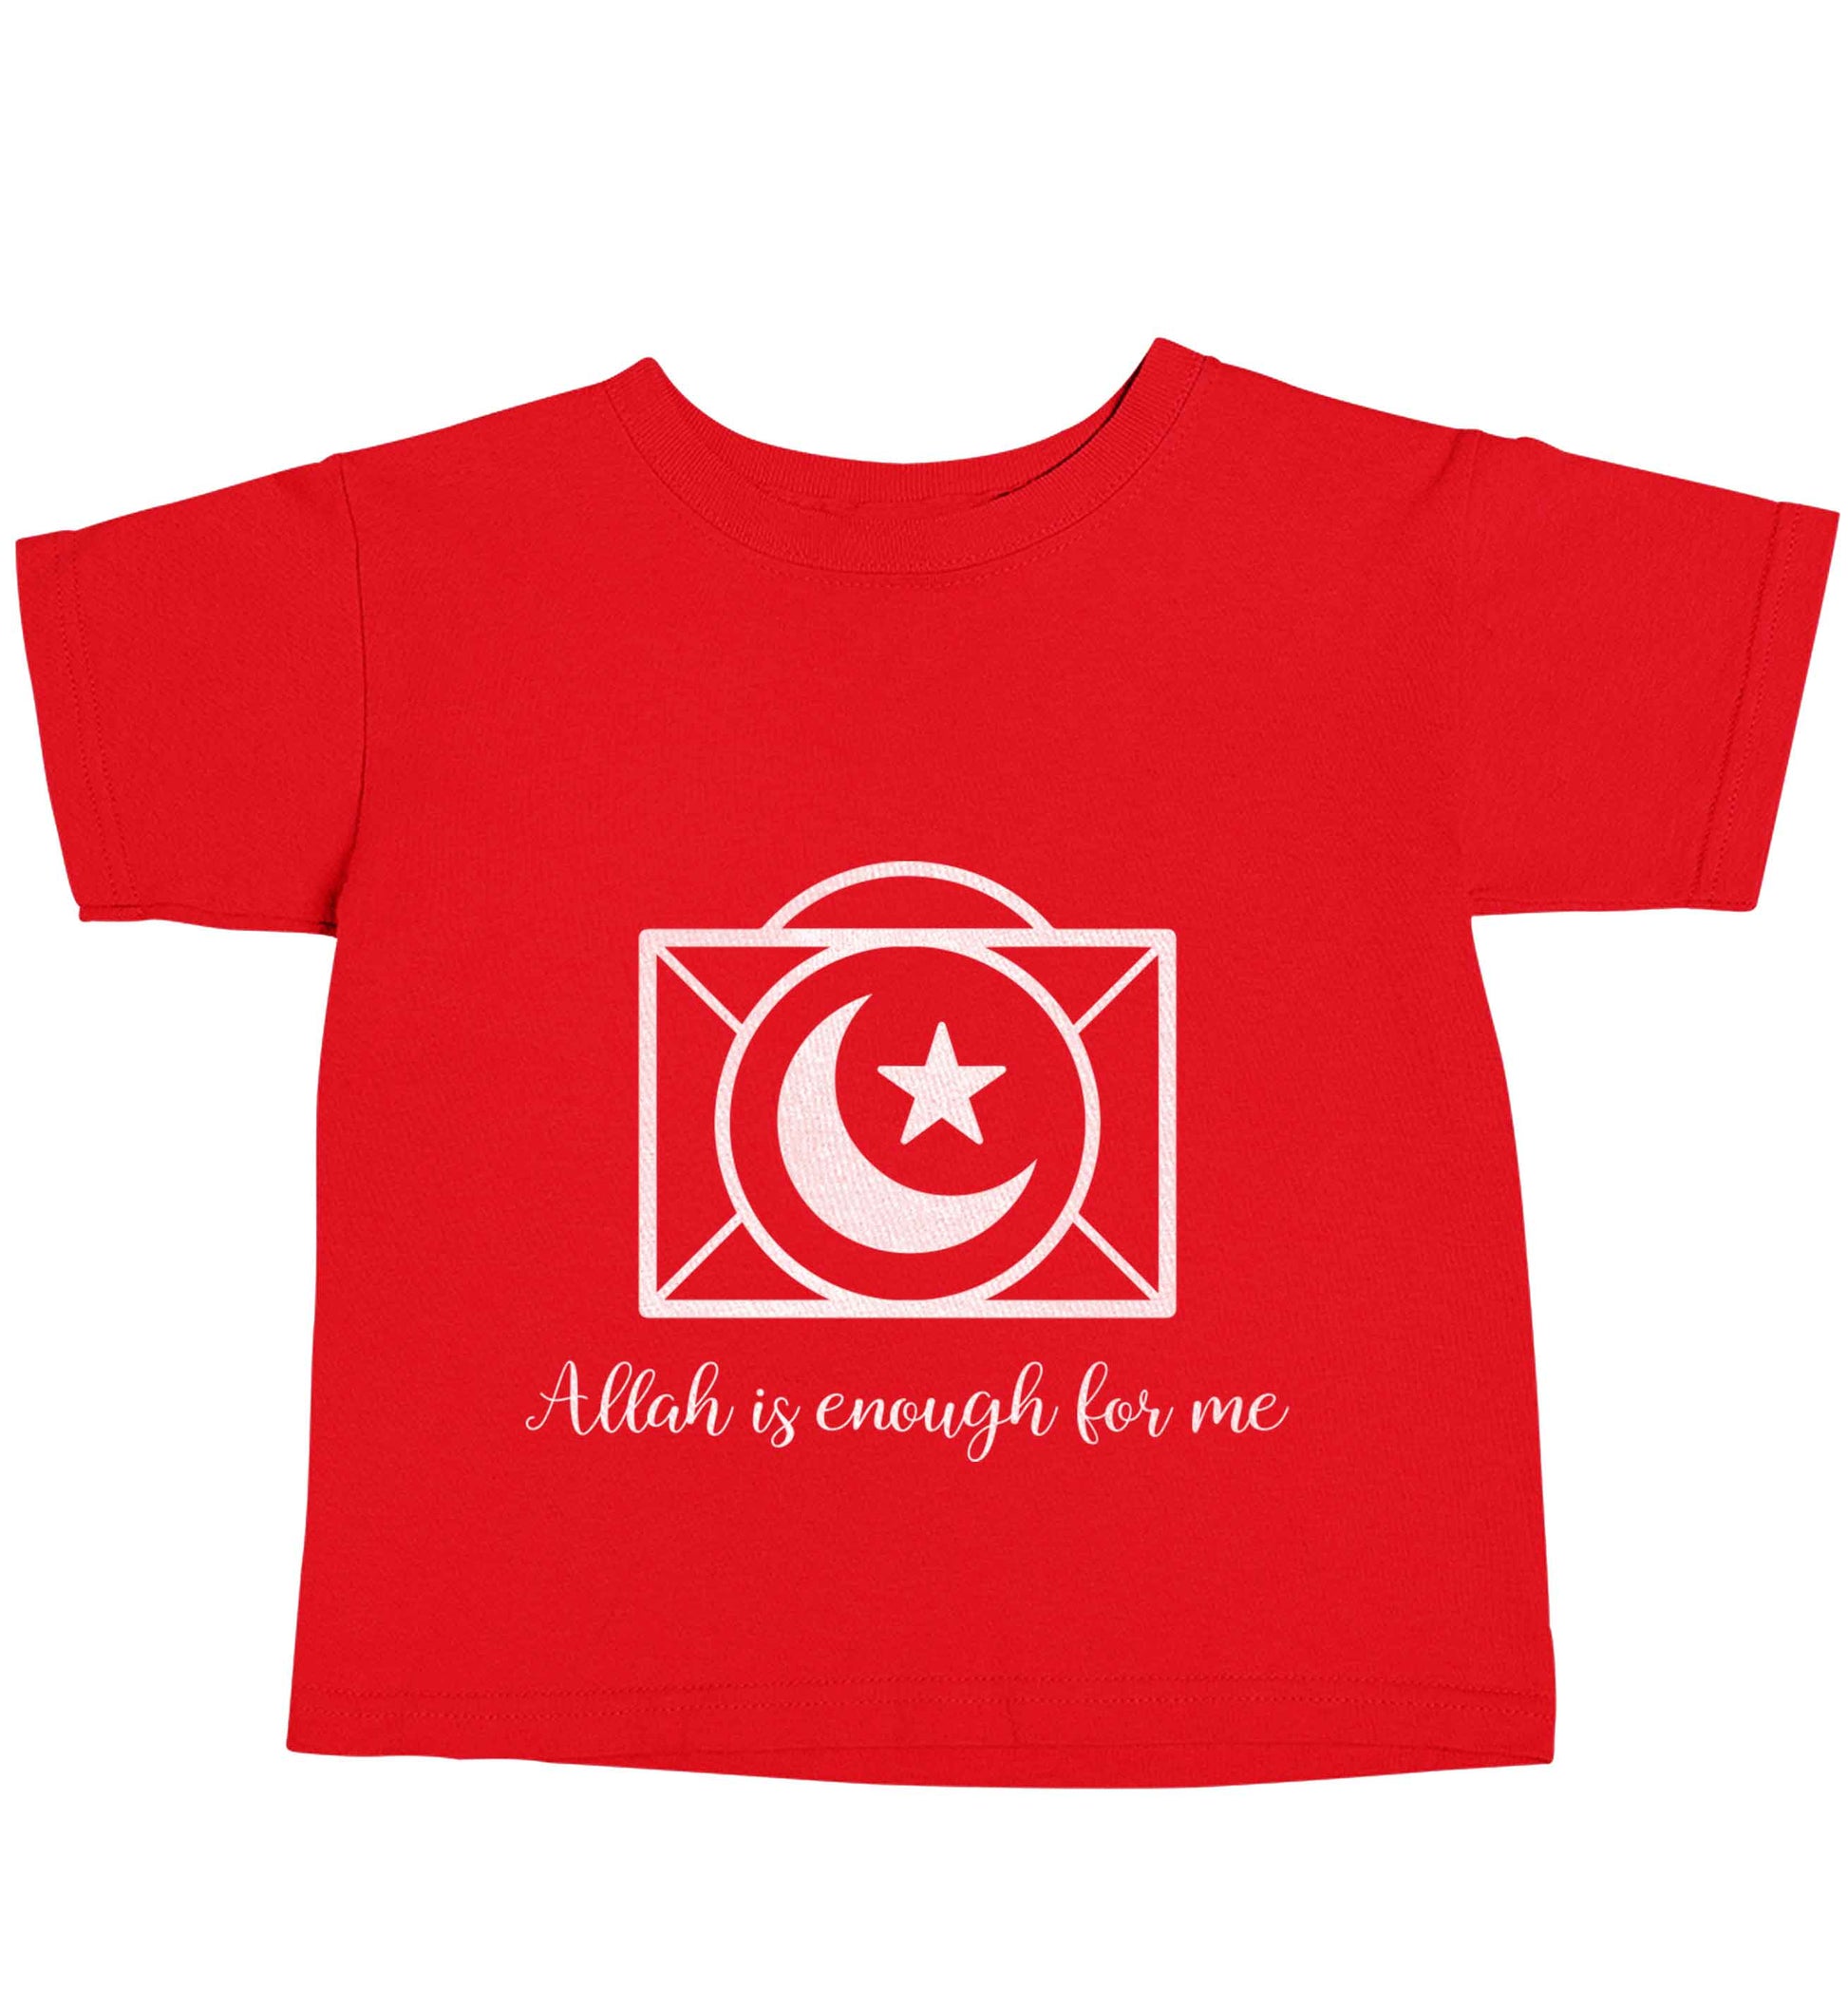 Allah is enough for me red baby toddler Tshirt 2 Years